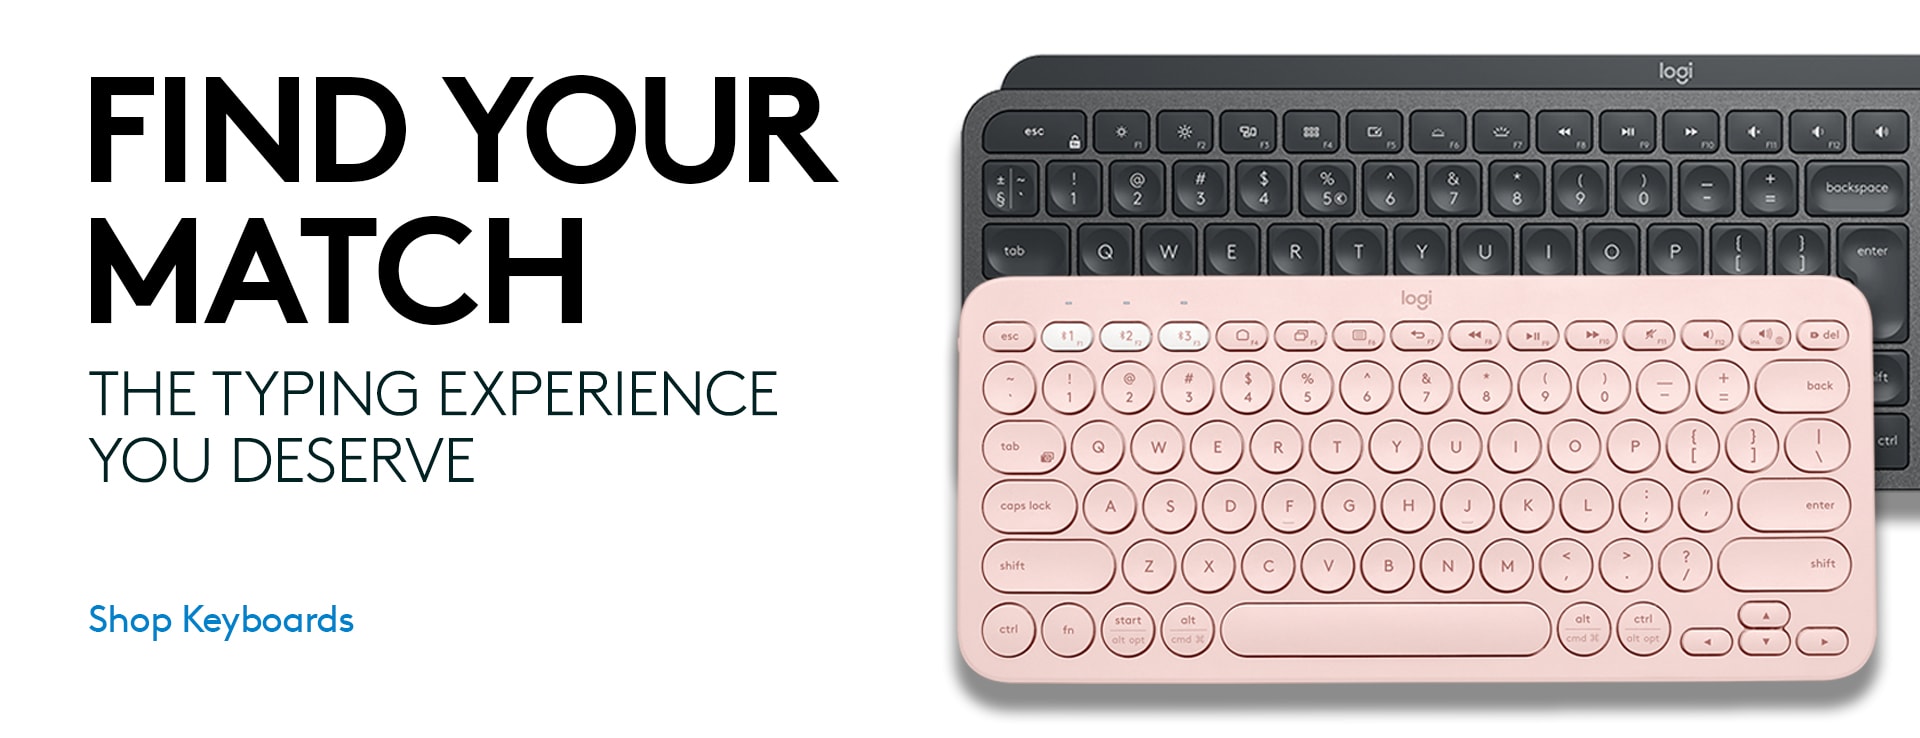 Find your Match | The typing experience you deserve